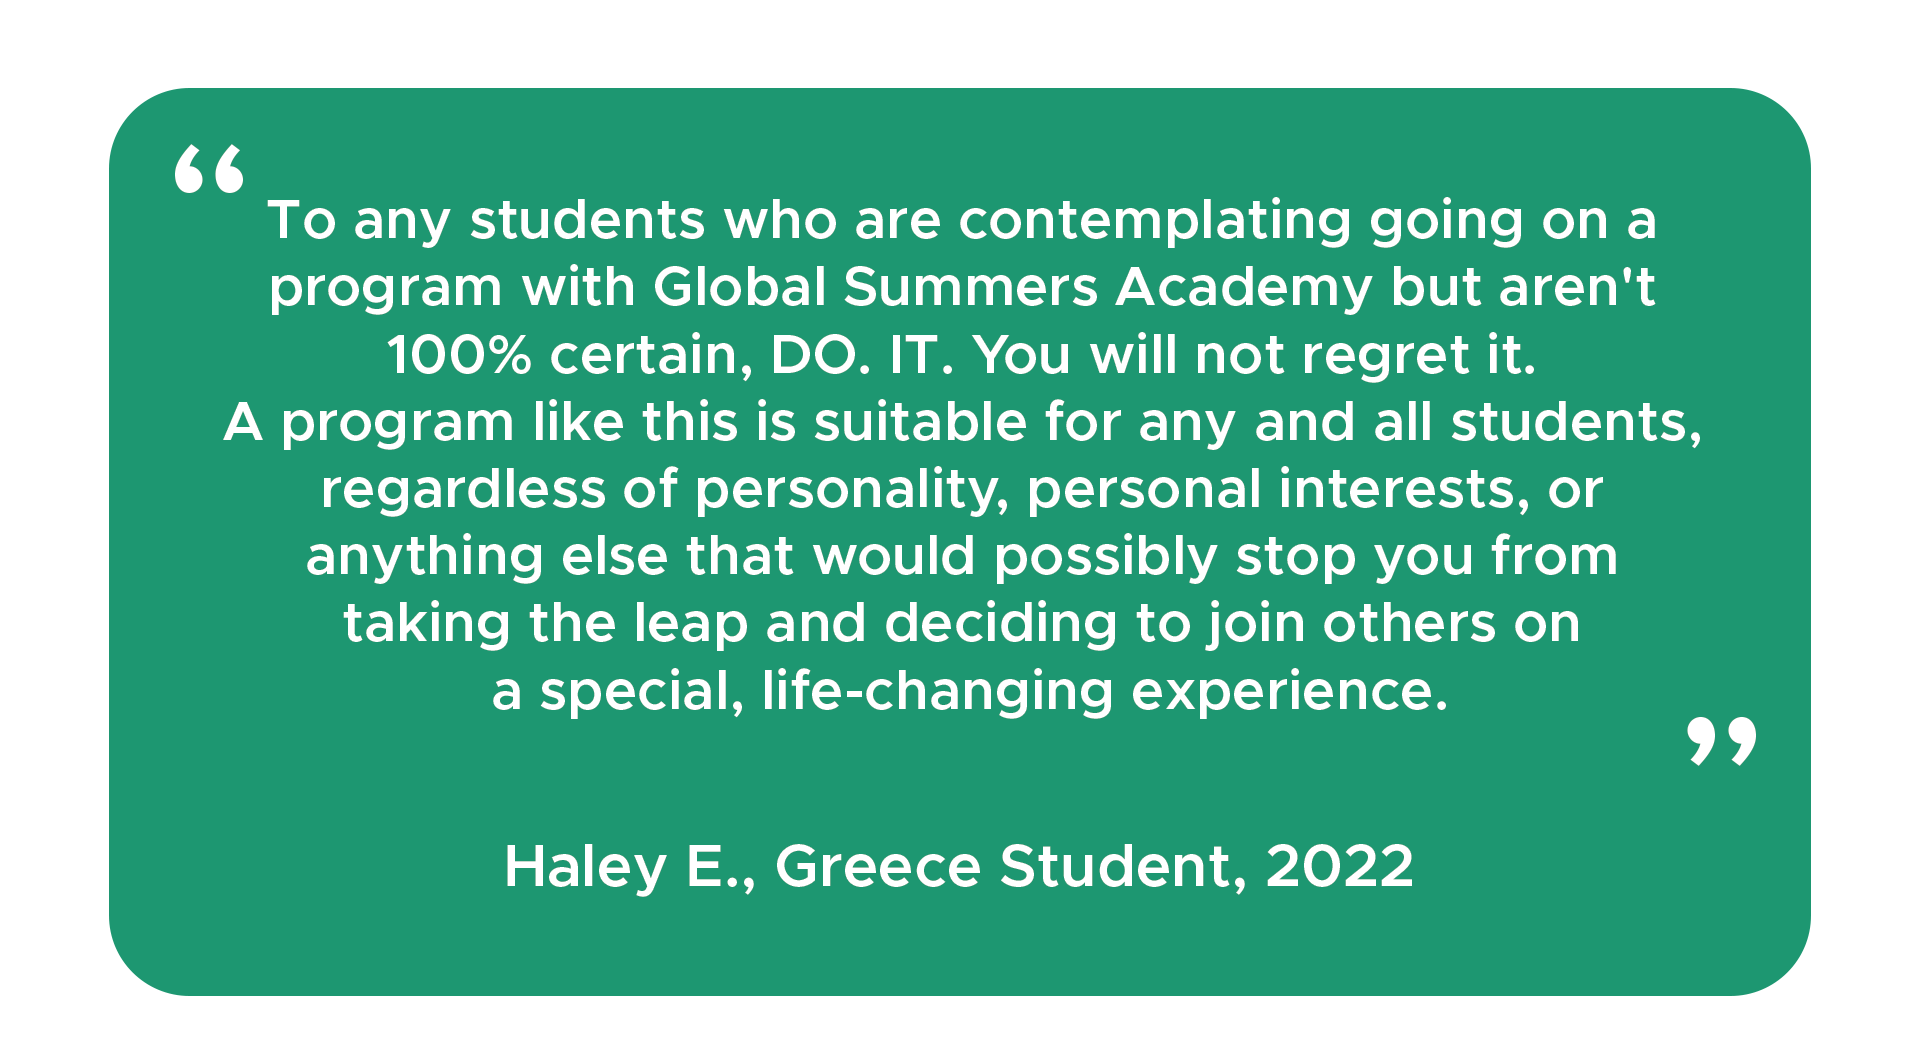 "To any students who are contemplating going on a program with Global Summers Academy but aren't 100% certain, DO. IT. You will not regret it. A program like this is suitable for any and all students, regardless of personality, personal interests, or anything else that would possibly stop you from taking the leap and deciding to join others on a special, life-changing experience." - Haley E., Student, 2022